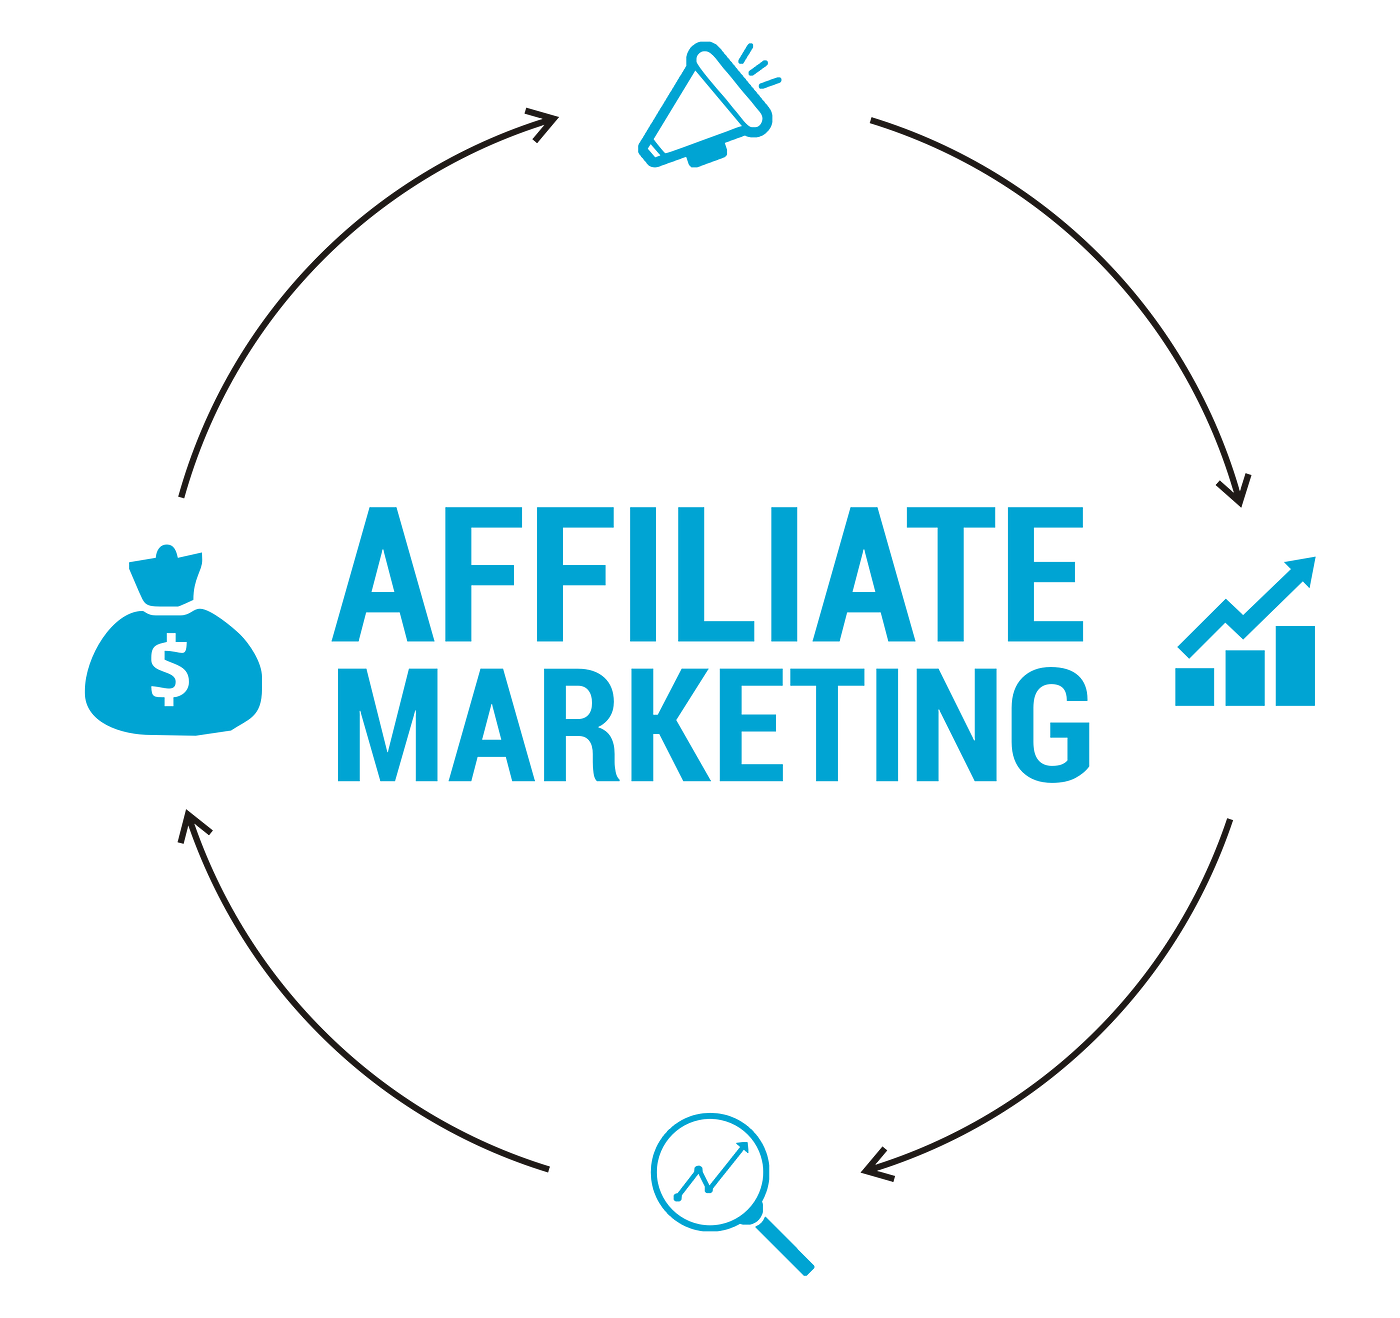 Best Techniques For Optimizing Affiliate Marketing Funnels To Maximize Conversions